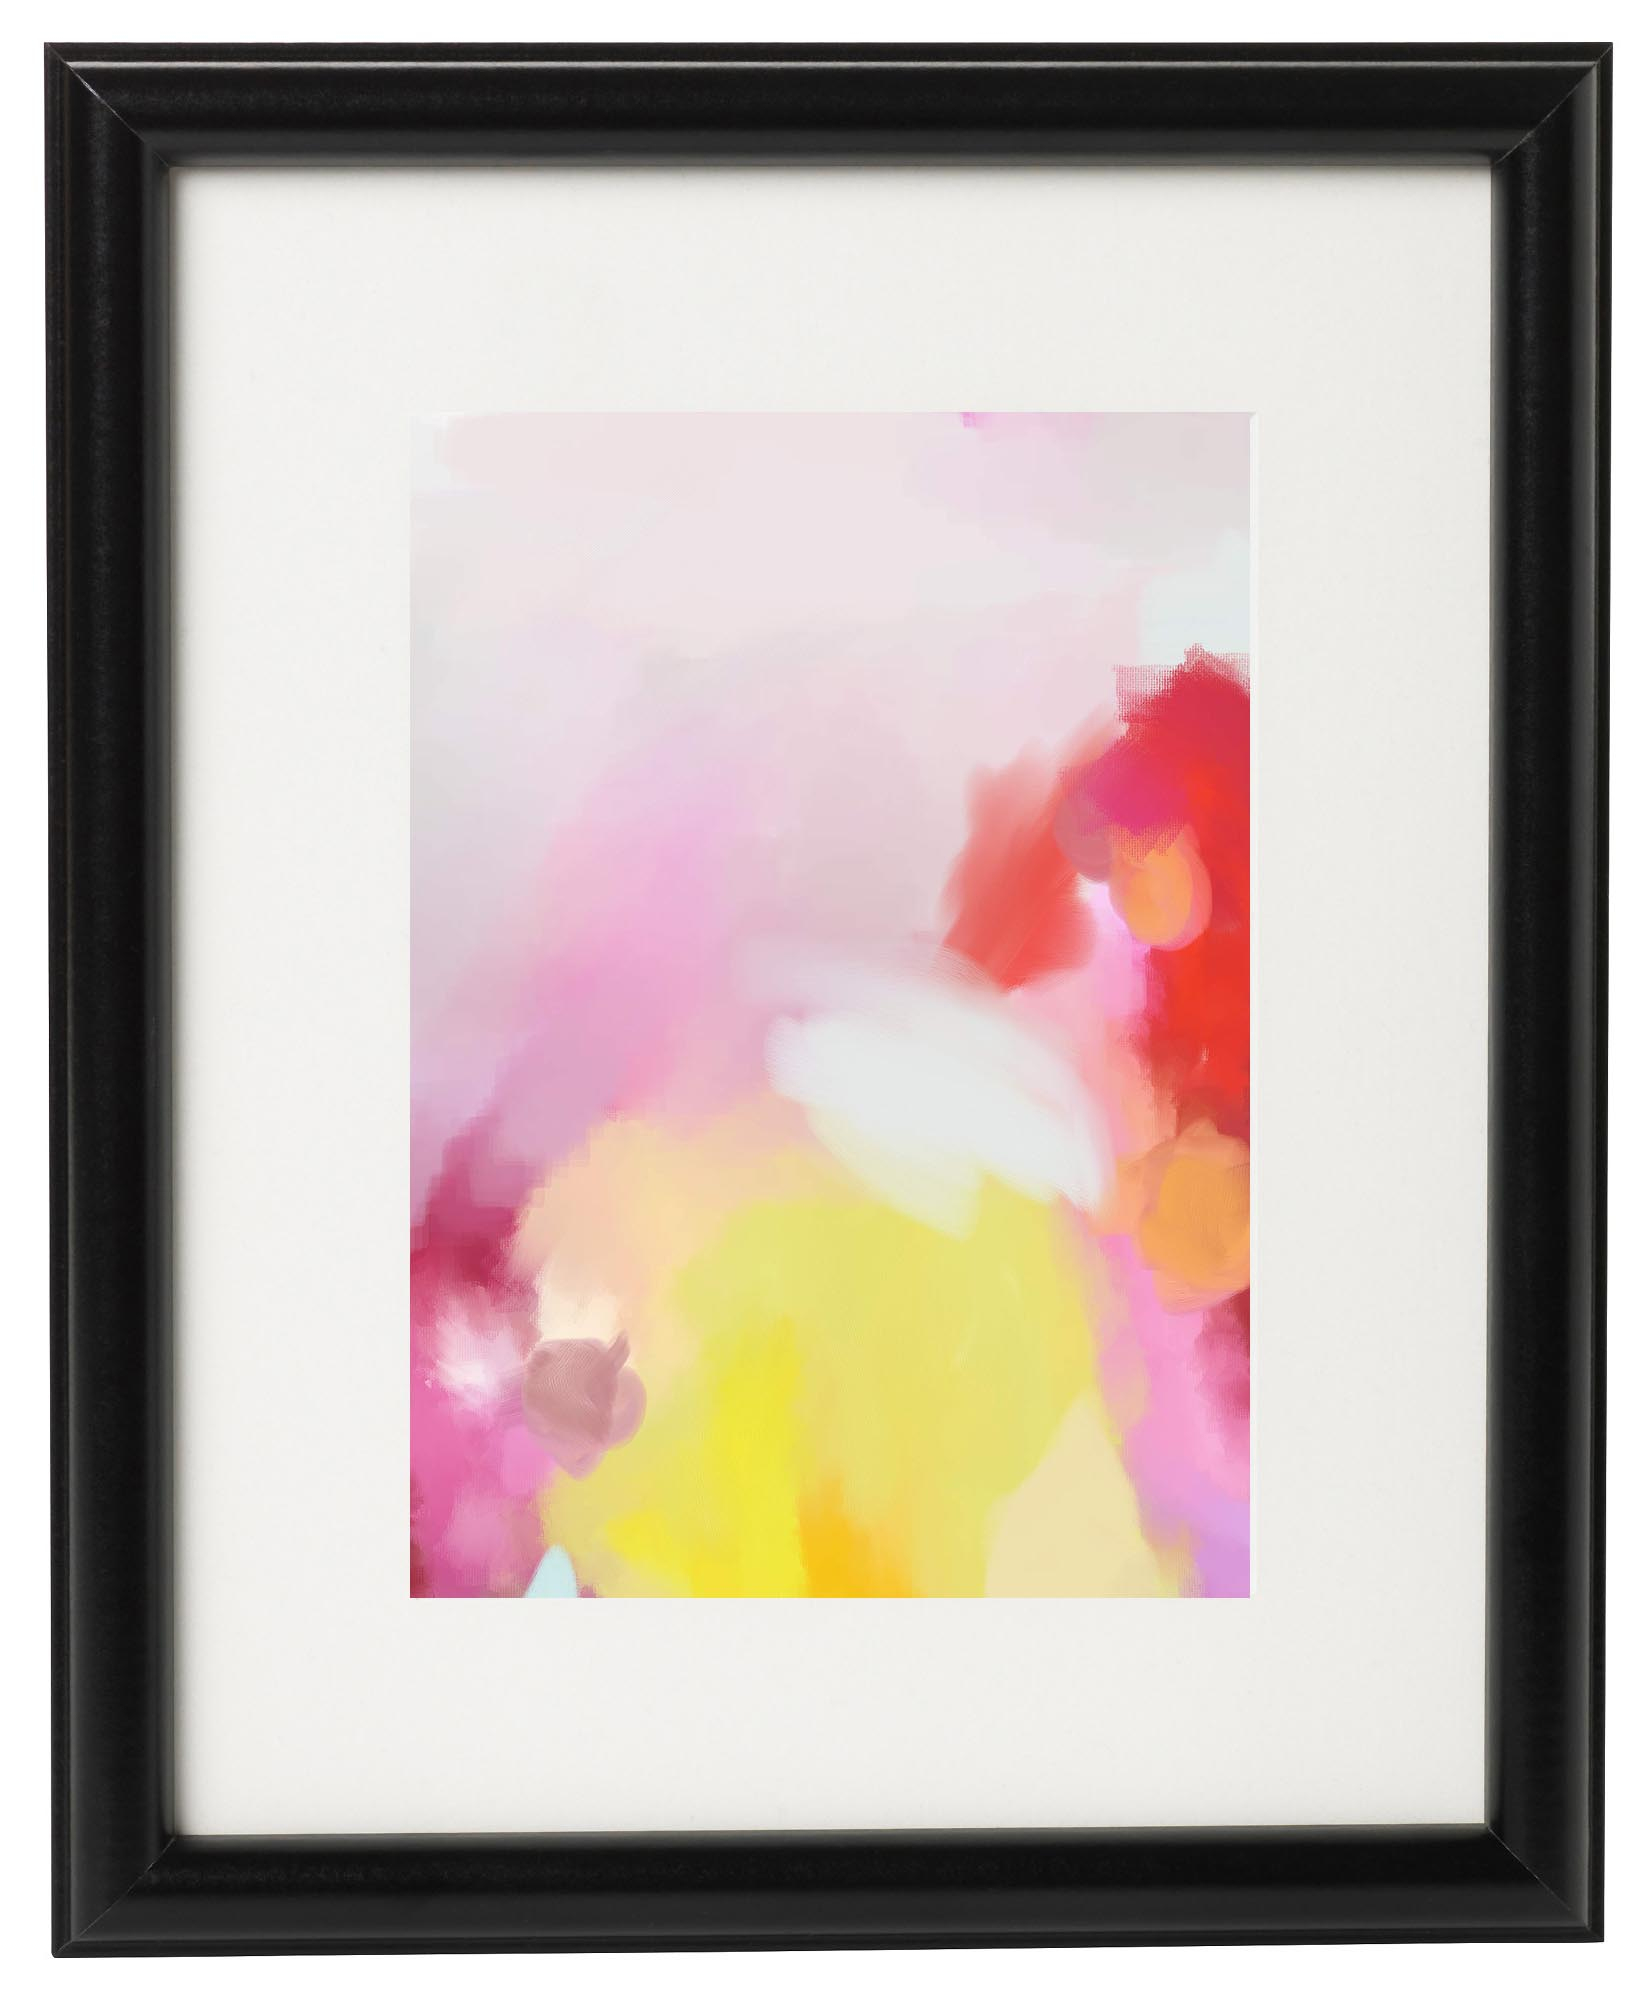 Gallery Wall Free Printables: Download All 8 Colourful, Abstract Art - Free Printable Artwork To Frame